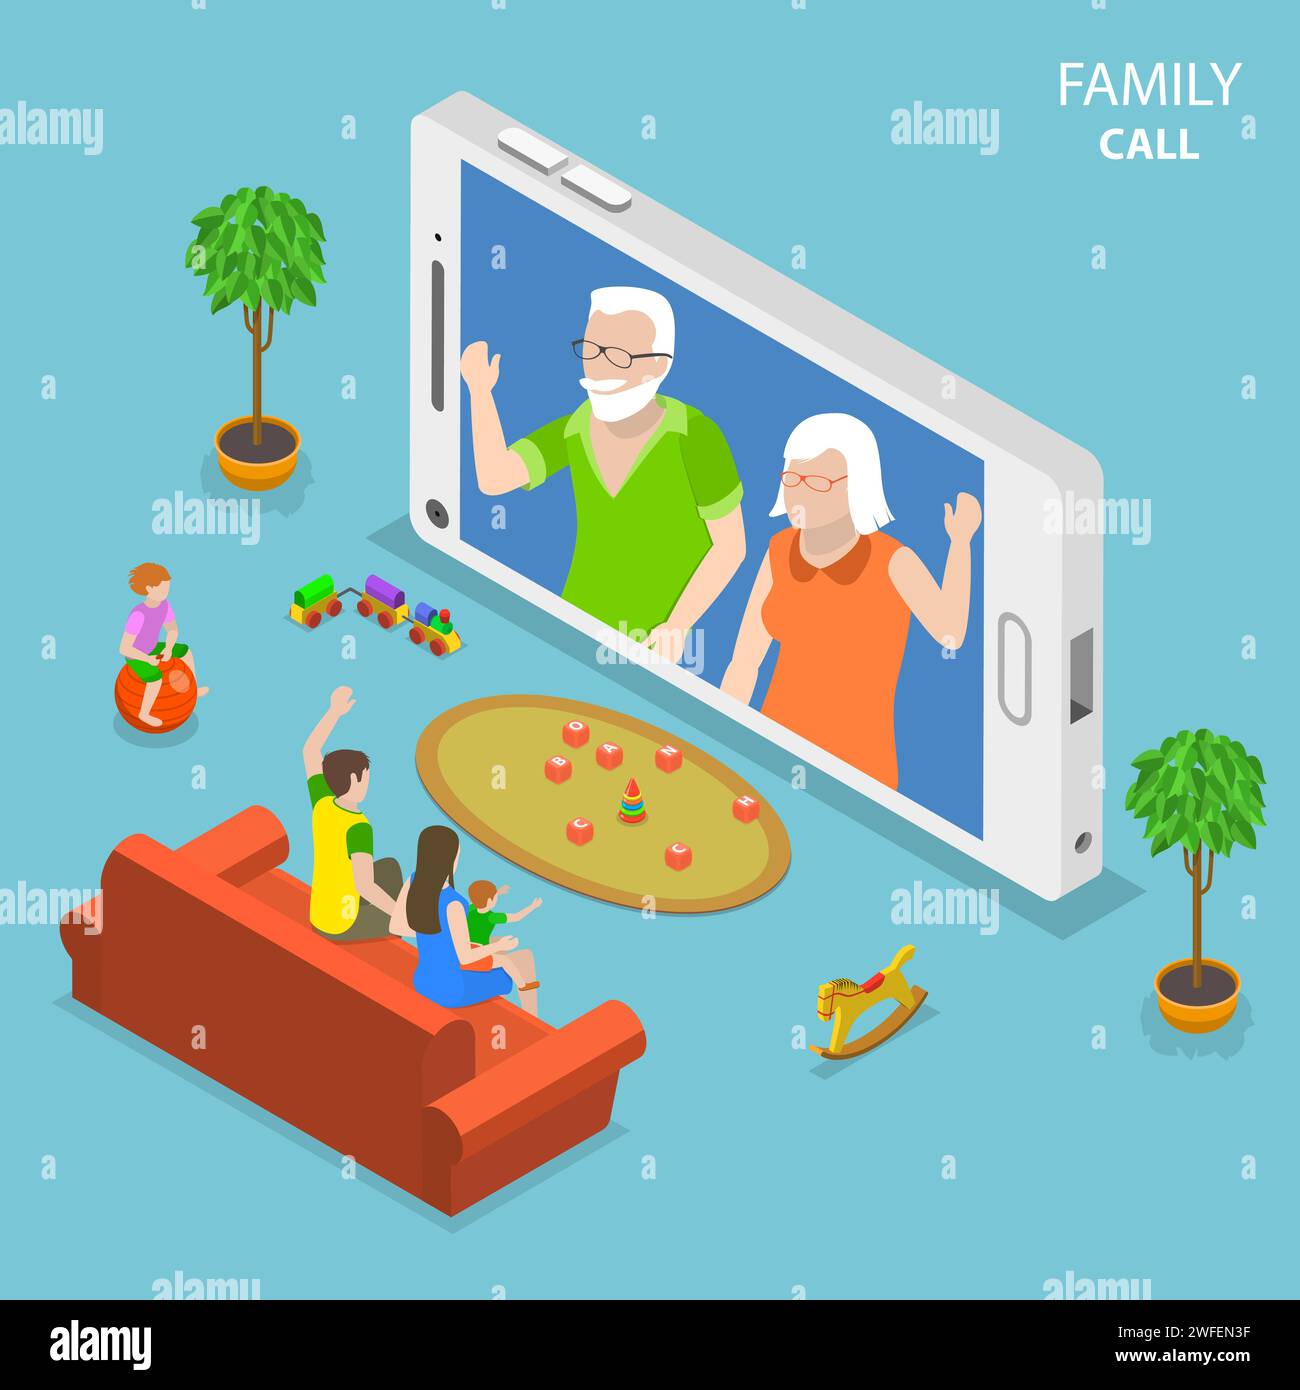 Family call flat isometric vector concept. Young family with 2 kids are having video call with thair parents using the smartphone. Stock Vector